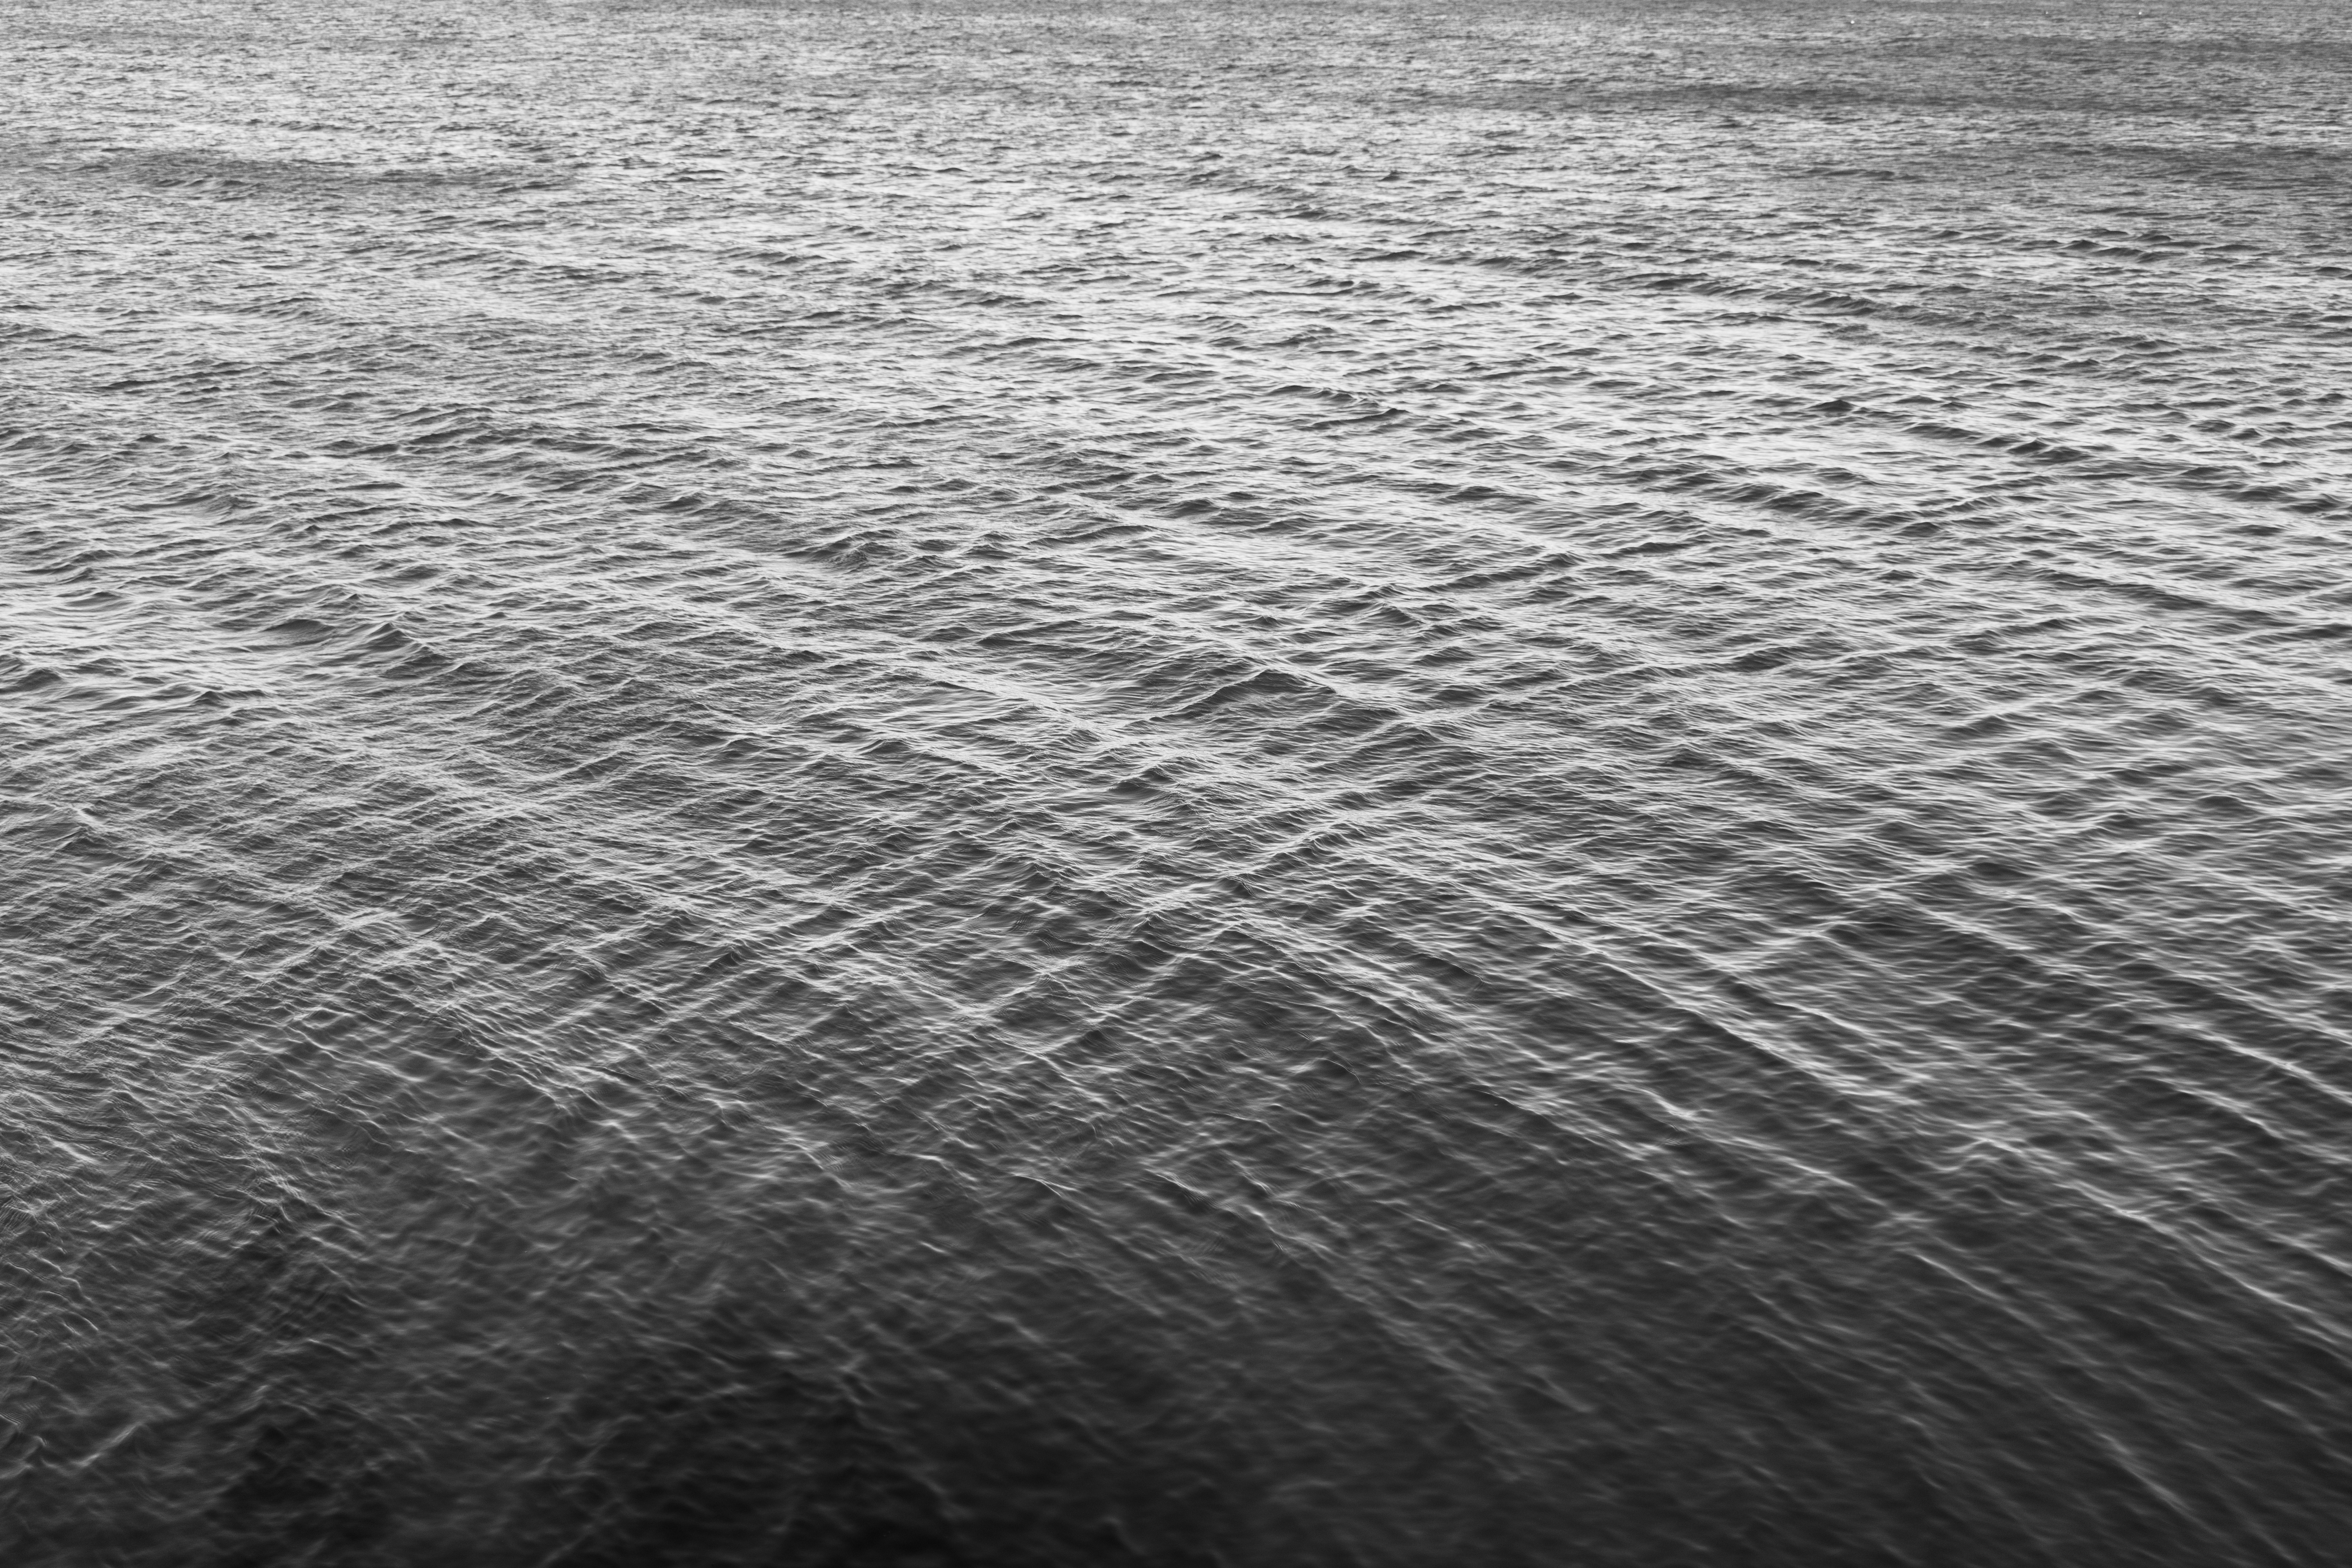 General 6000x4000 photography monochrome waves water